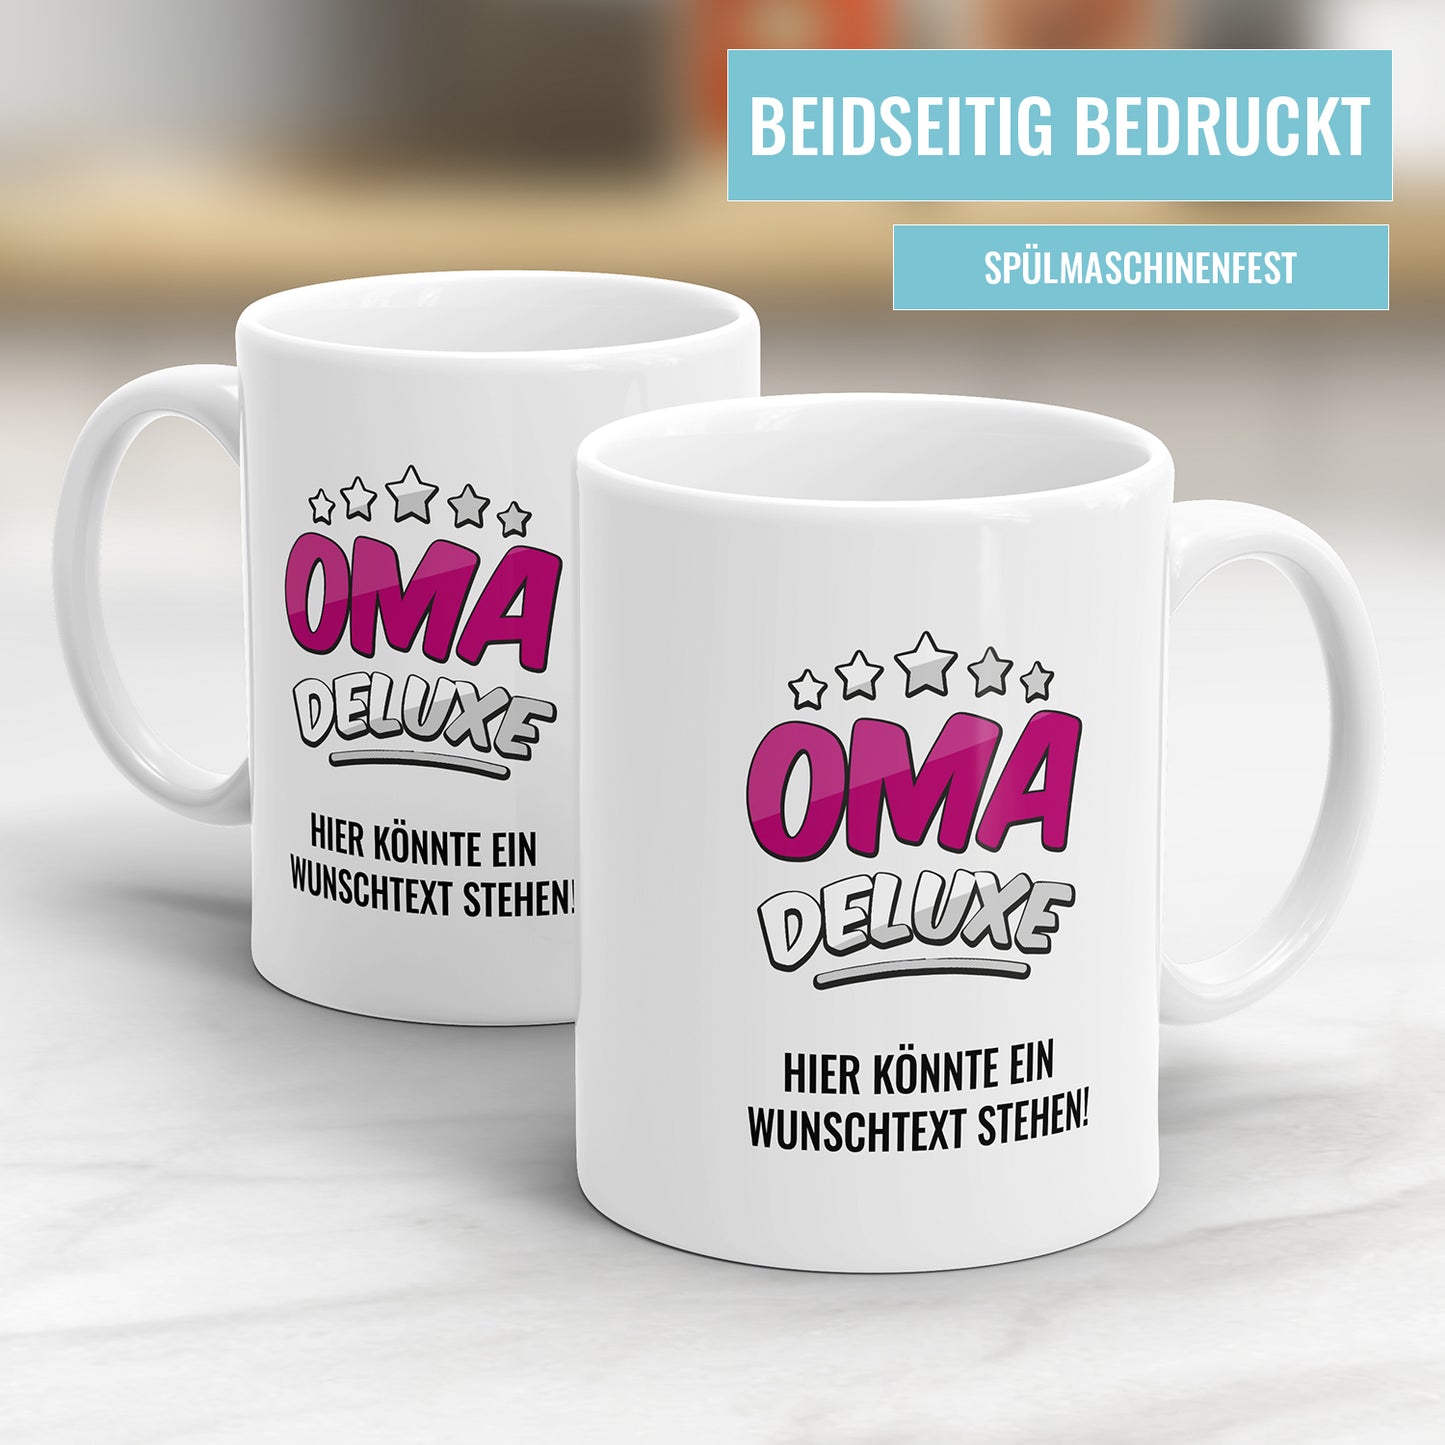 Oma Tasse 5 Sterne Oma Deluxe mit Wunschtext